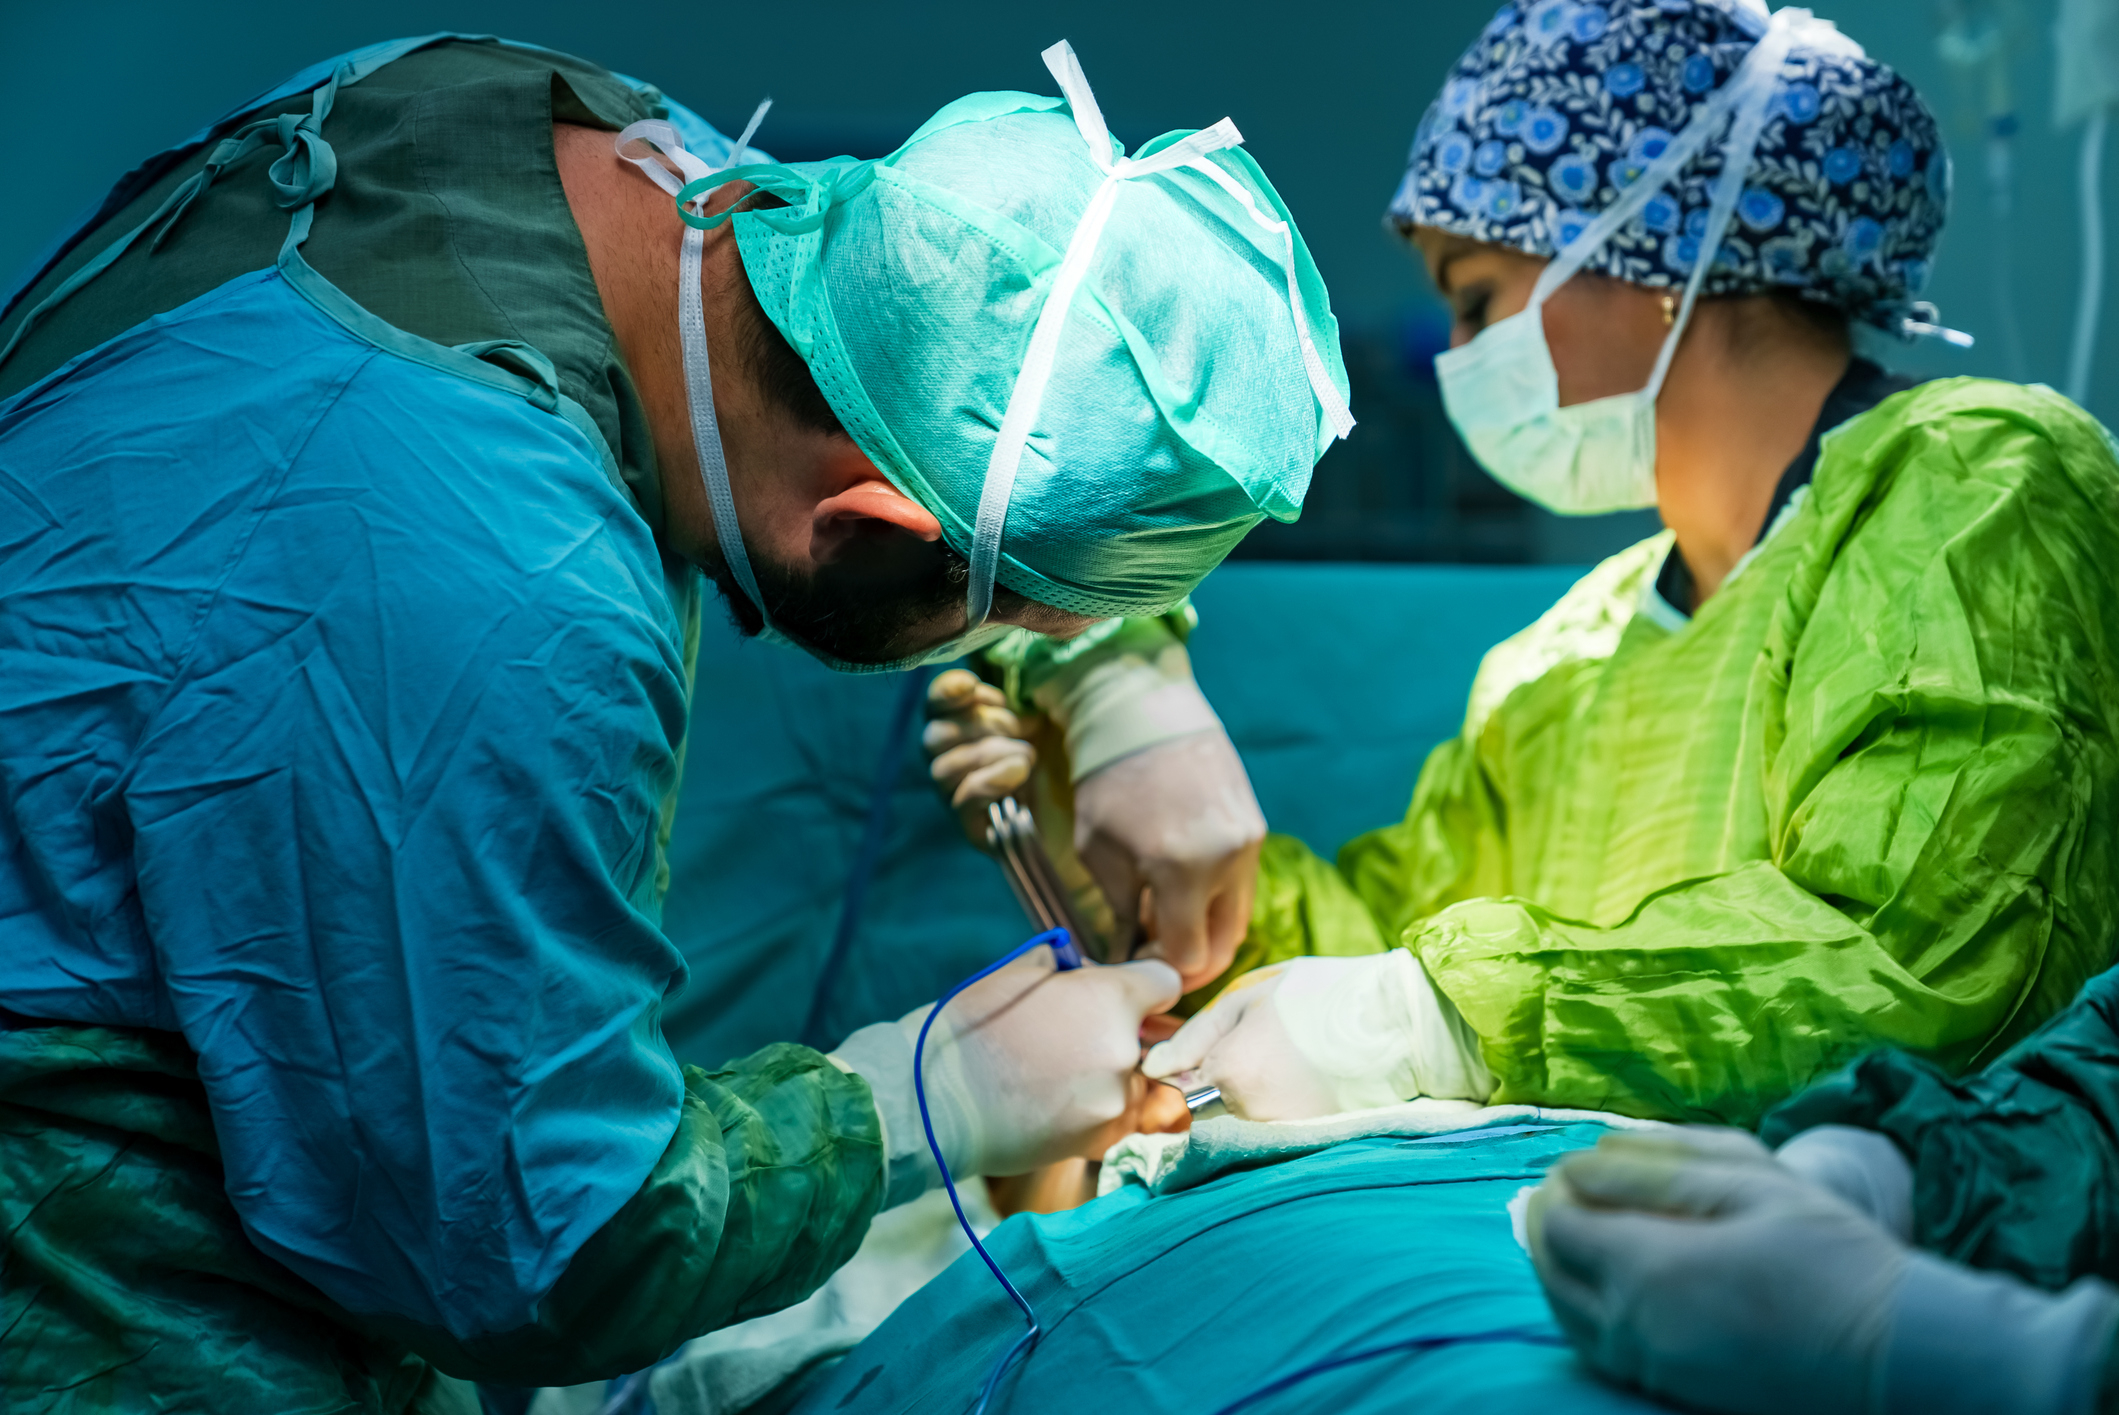 Surgeons in scrubs perform a surgery